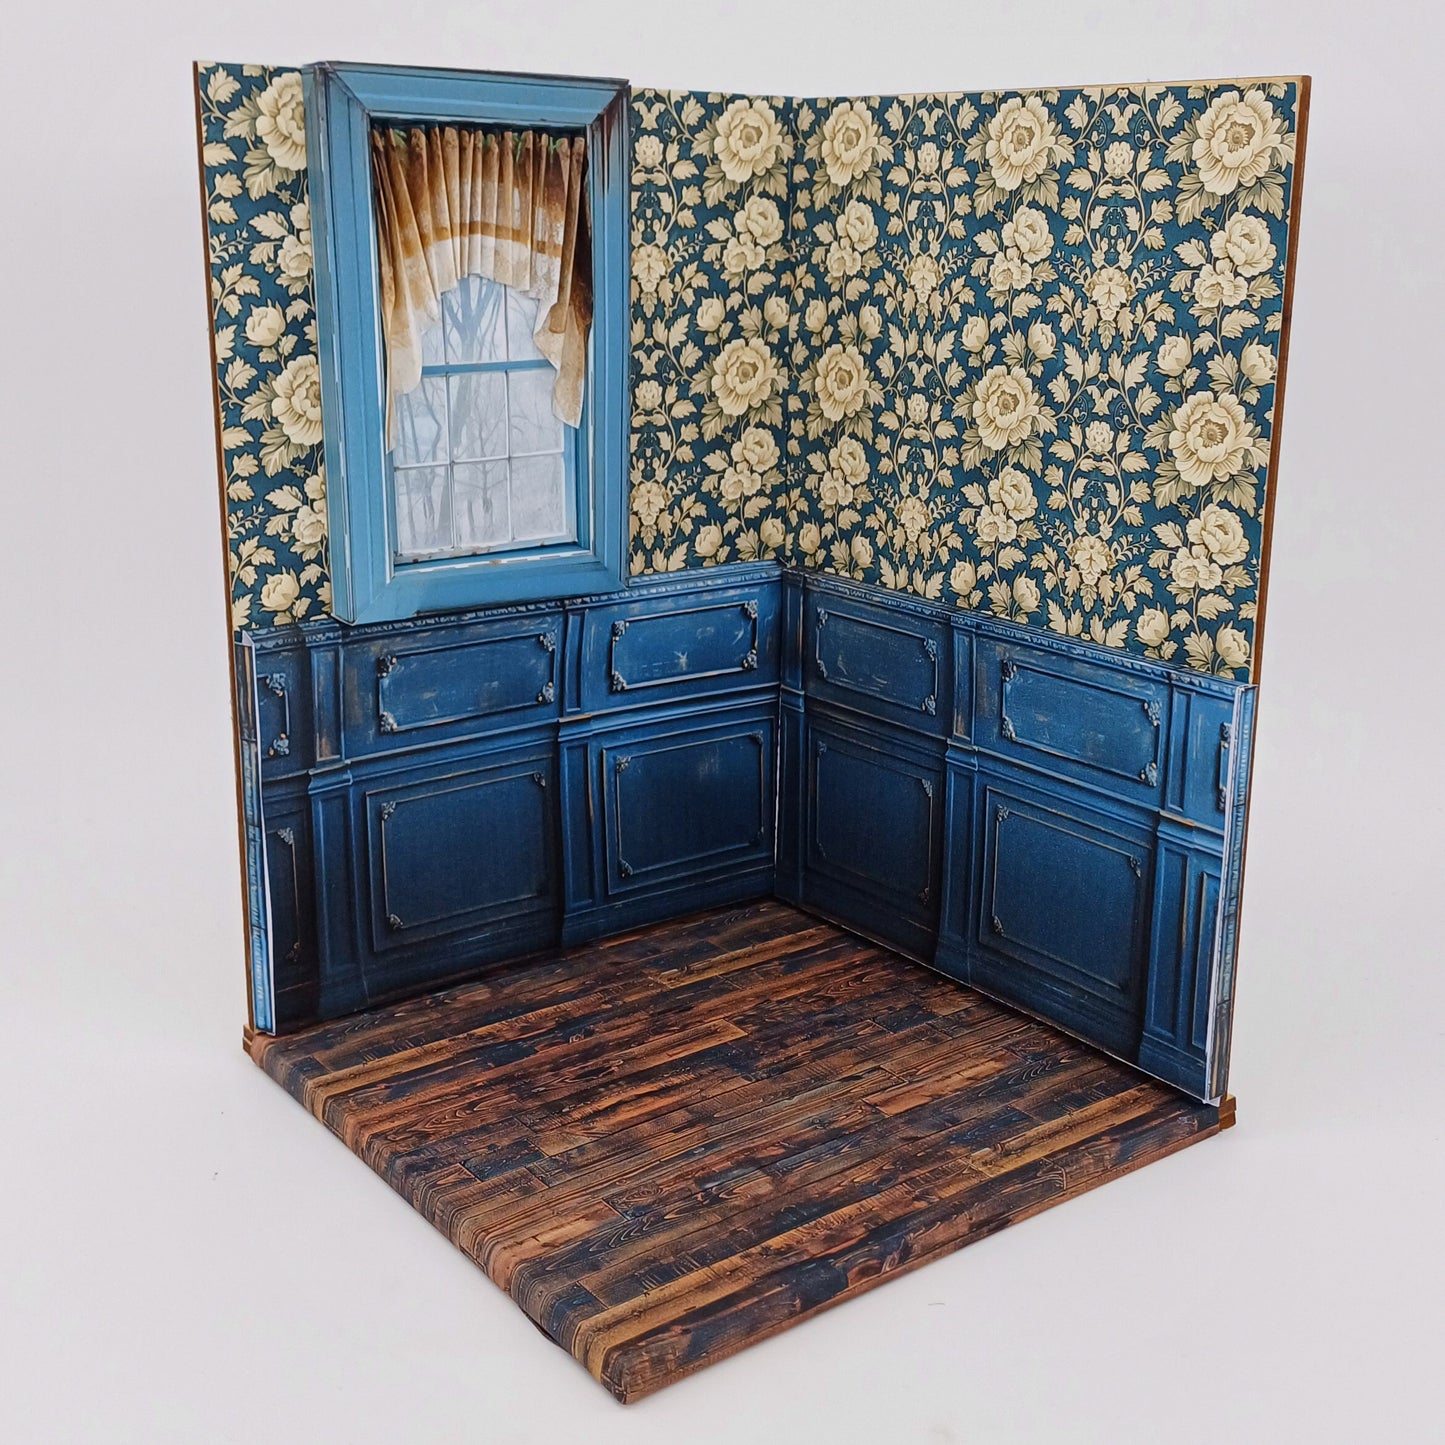 Roombox design "Blue Room" 1:12 scale for printing and handicrafts